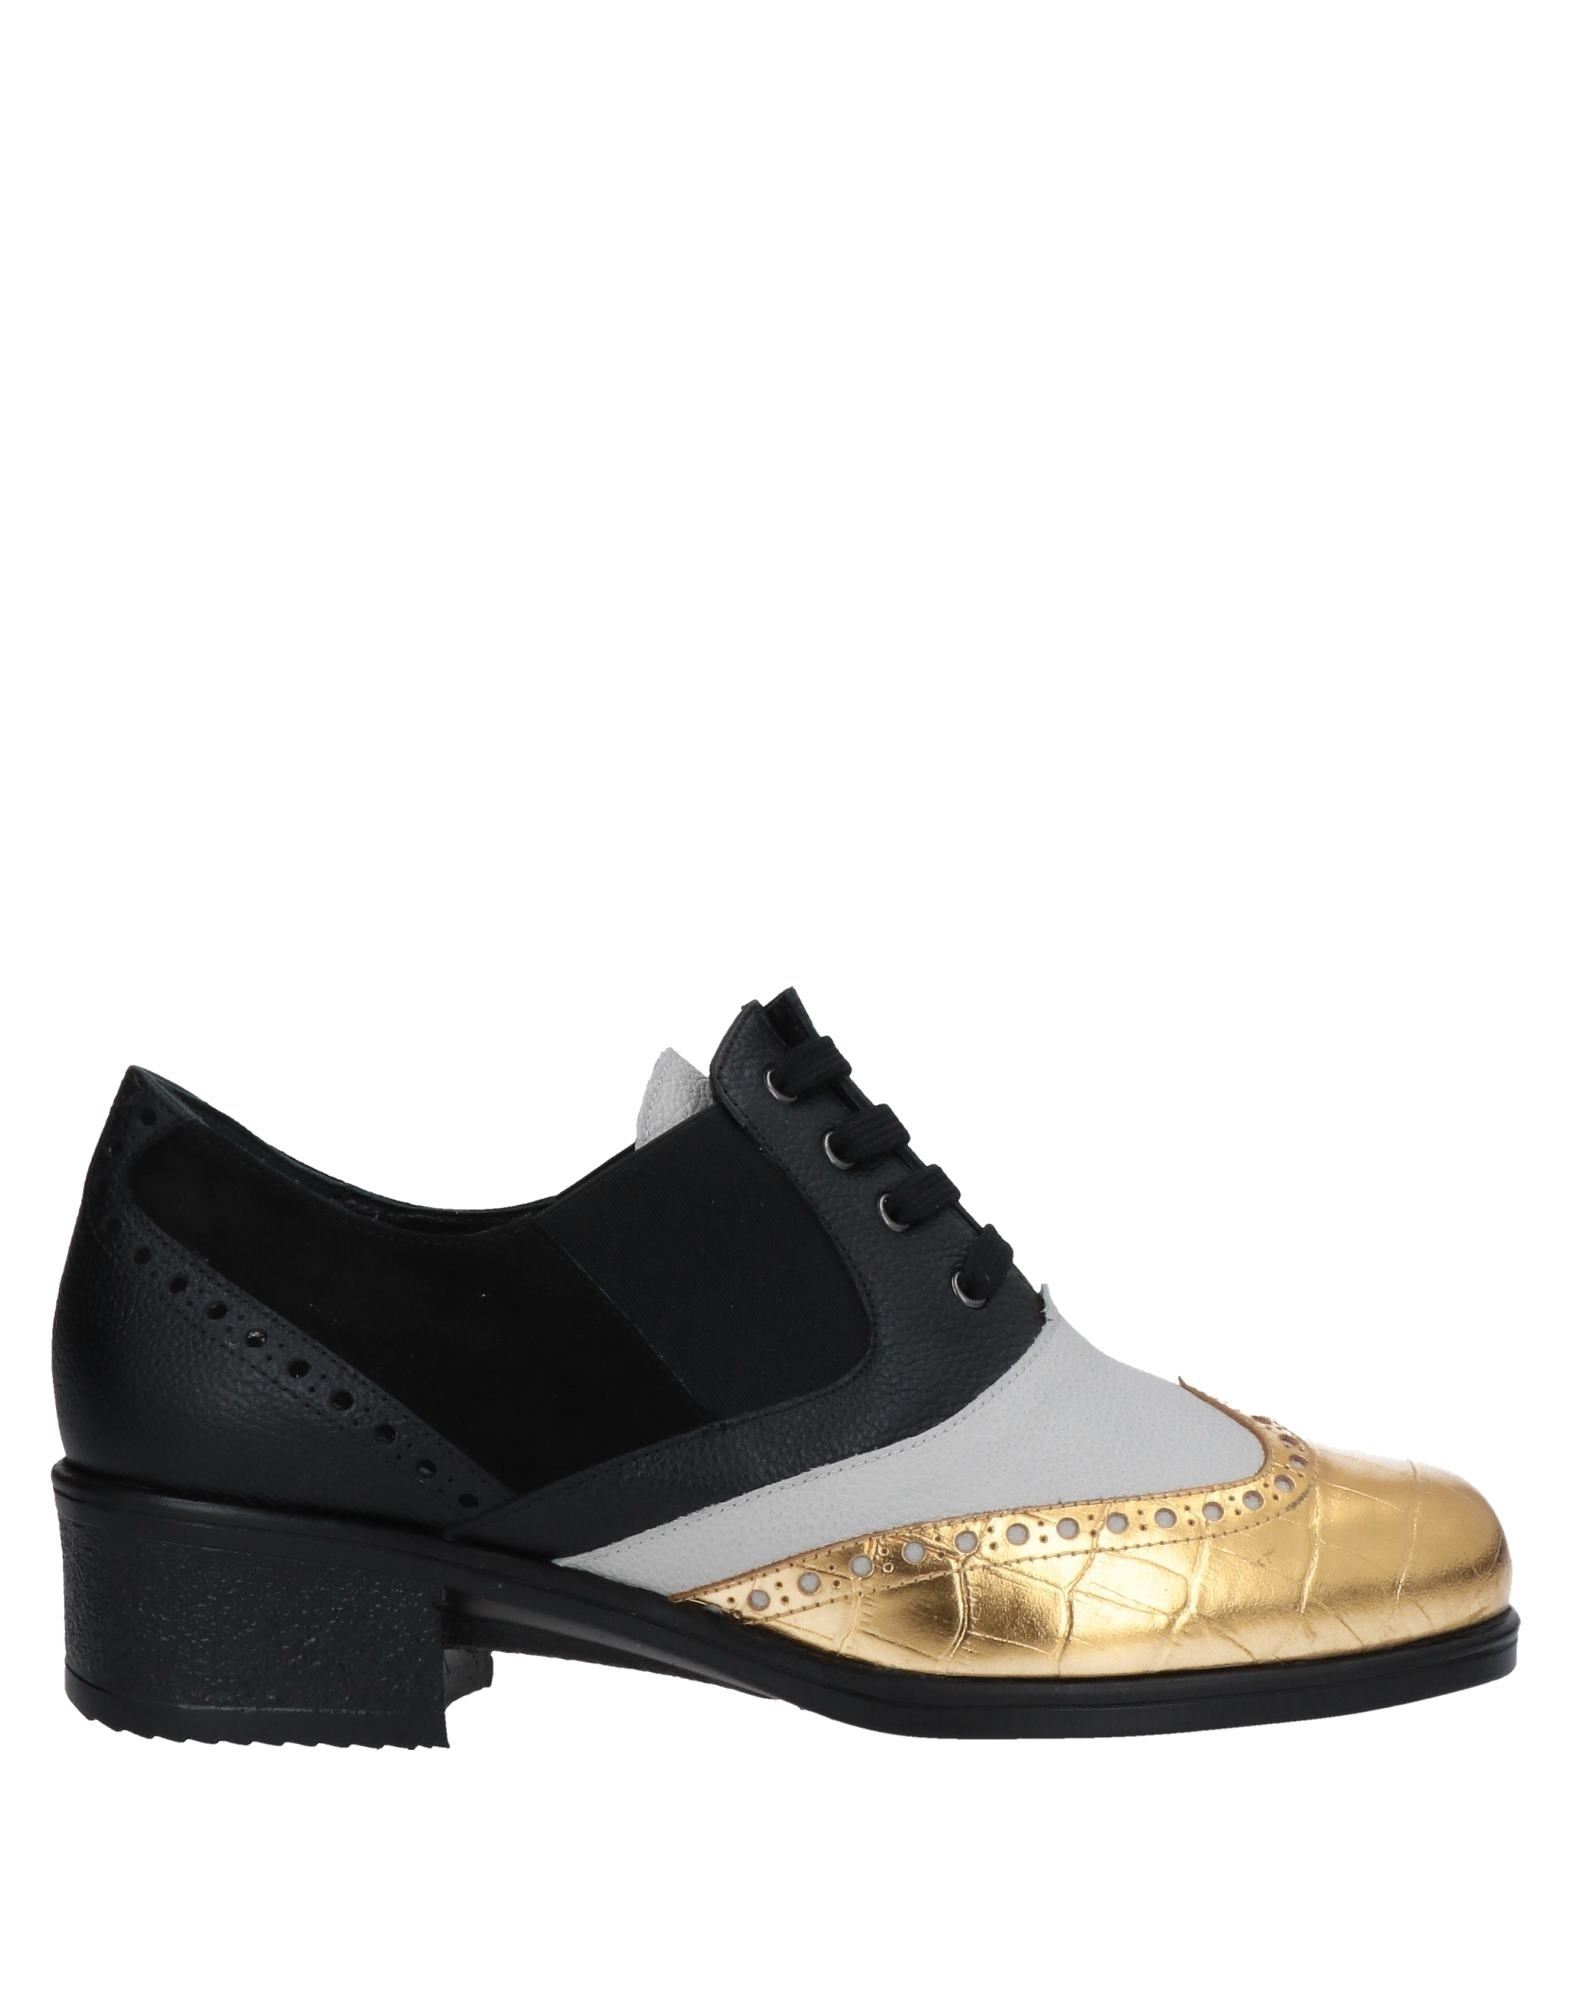 Daniele Ancarani Lace-up Shoes In Gold | ModeSens